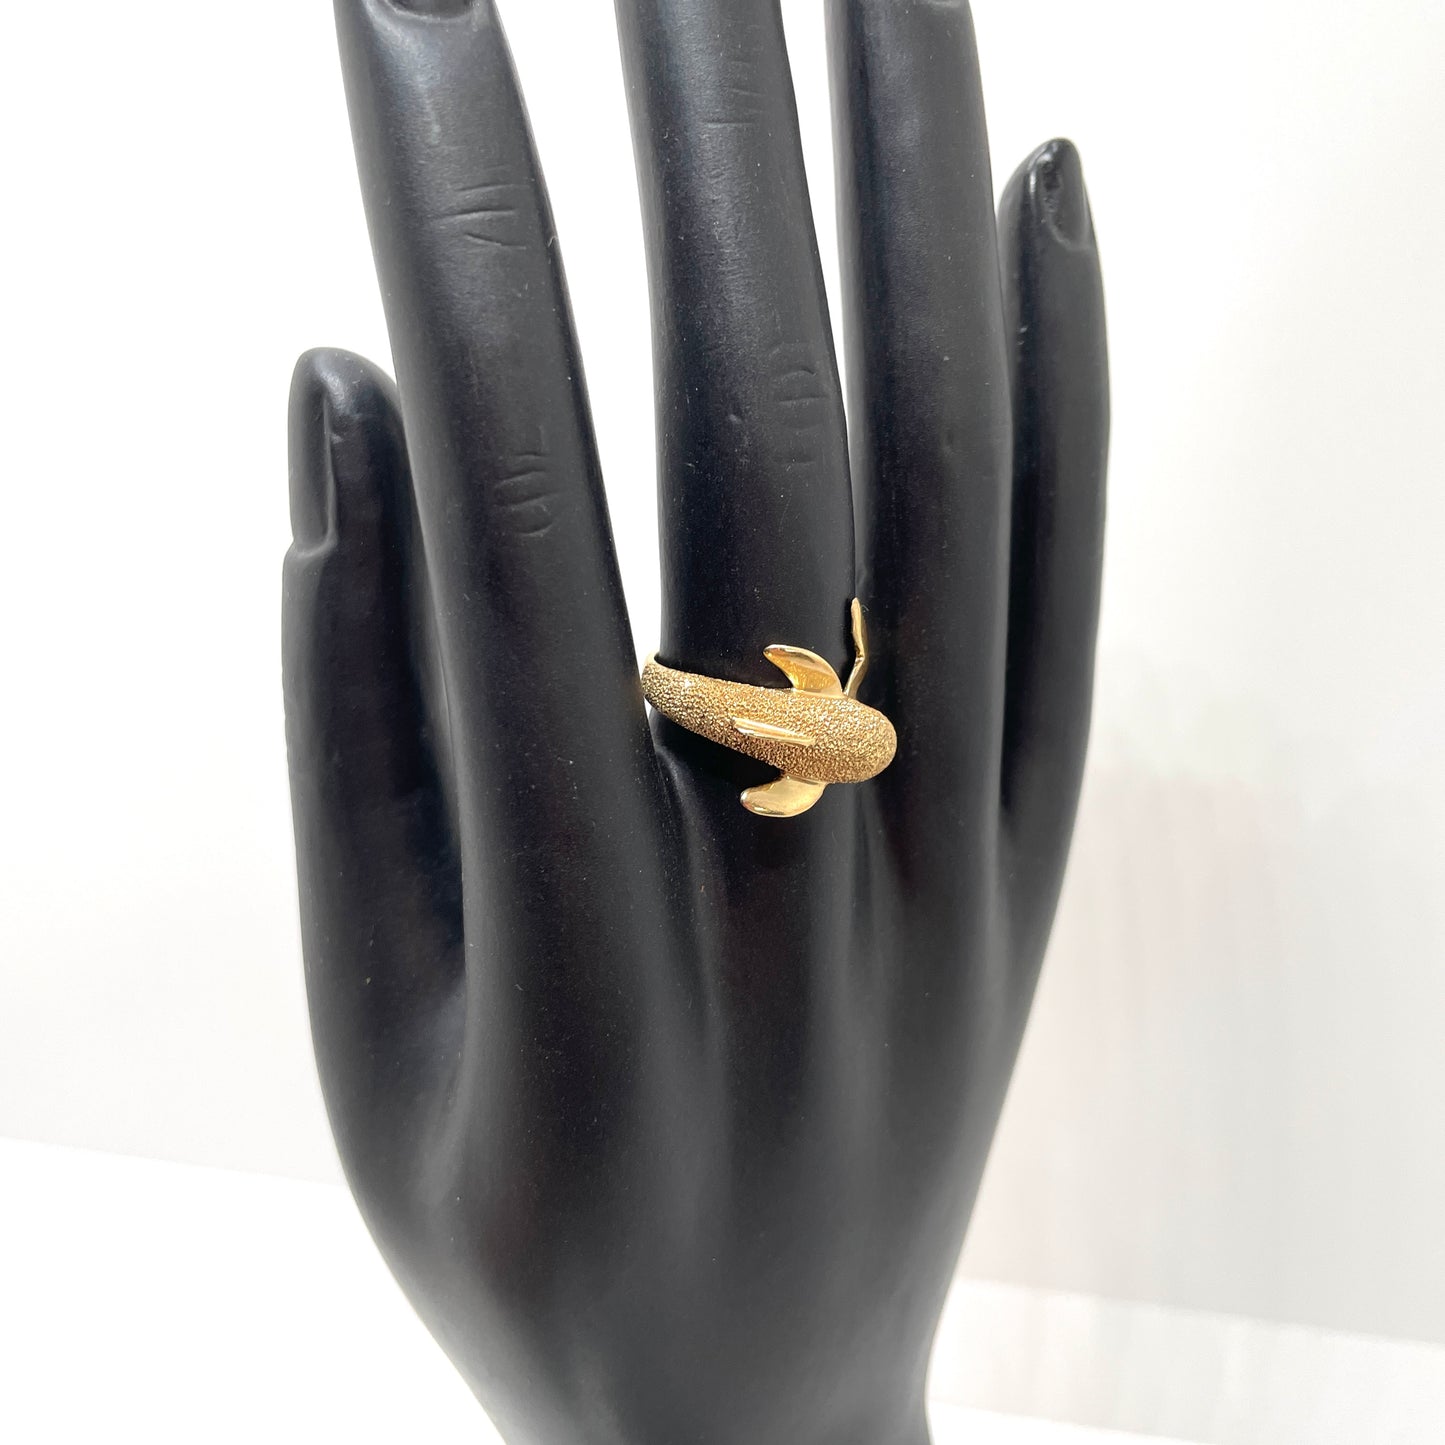 Vintage Dolphin Ring - Size 8